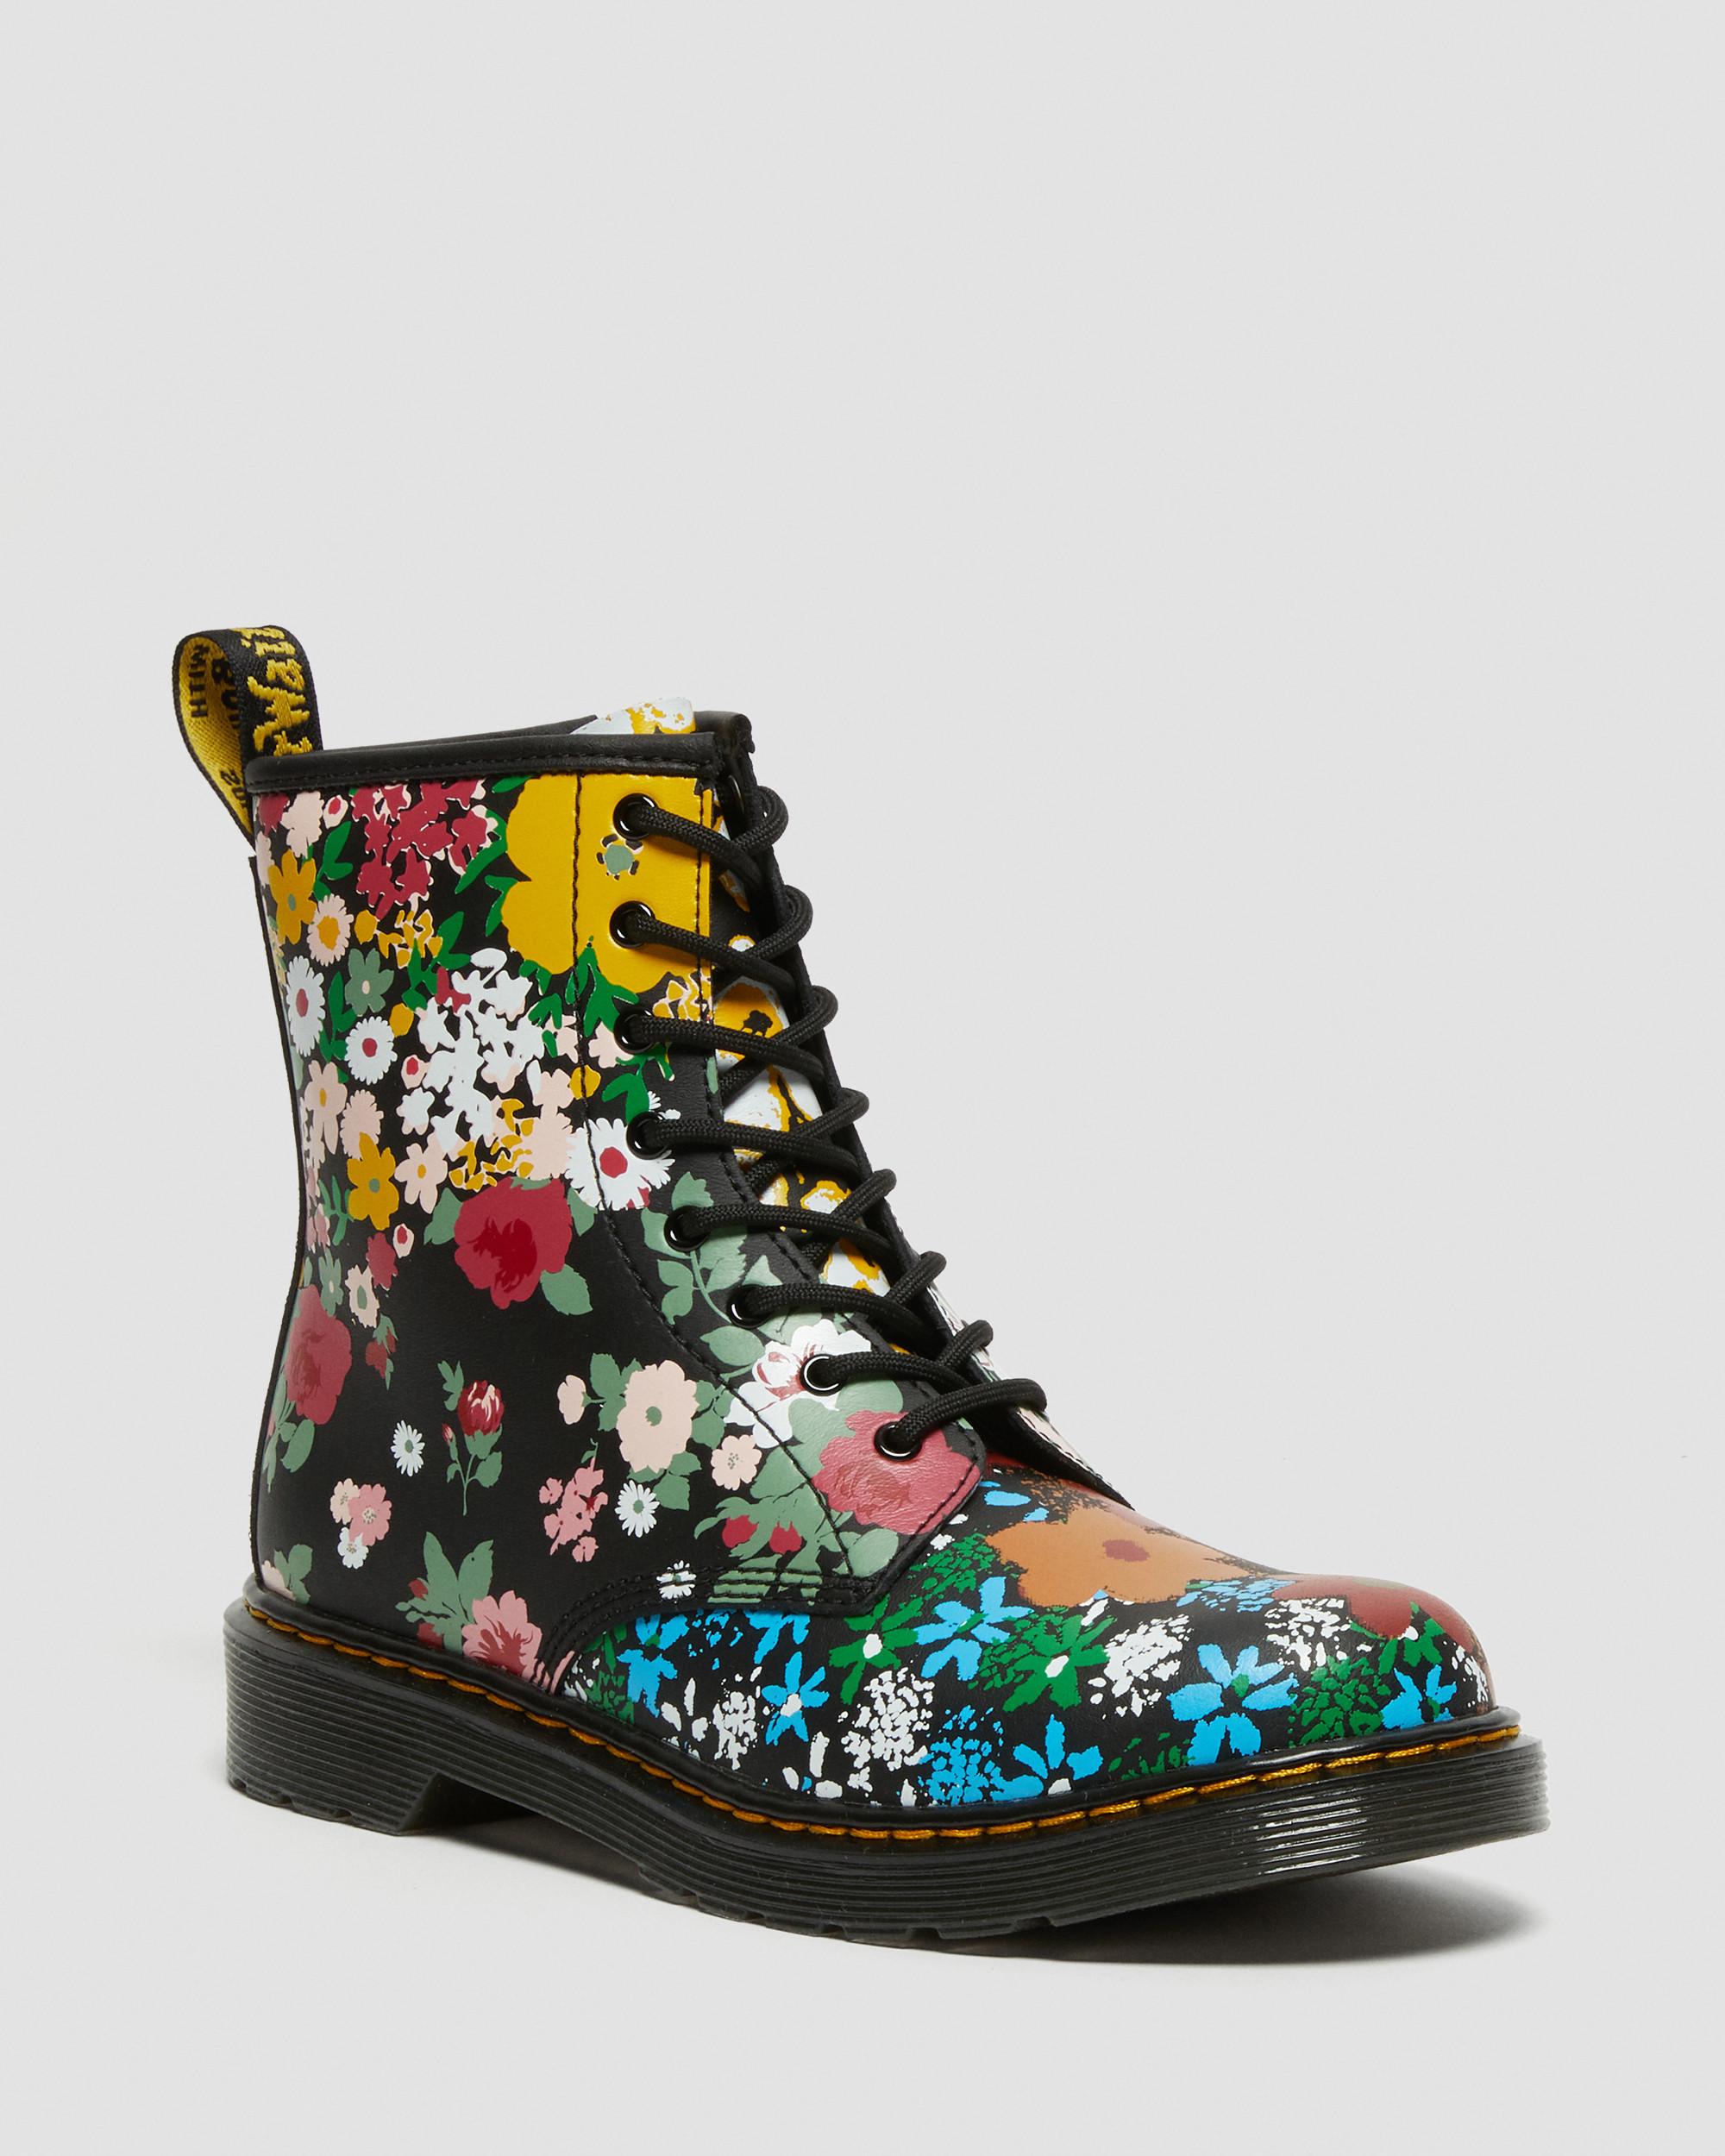 Martens Youth Boots Lace in Dr. Up Floral 1460 Leather | Black Up Mash